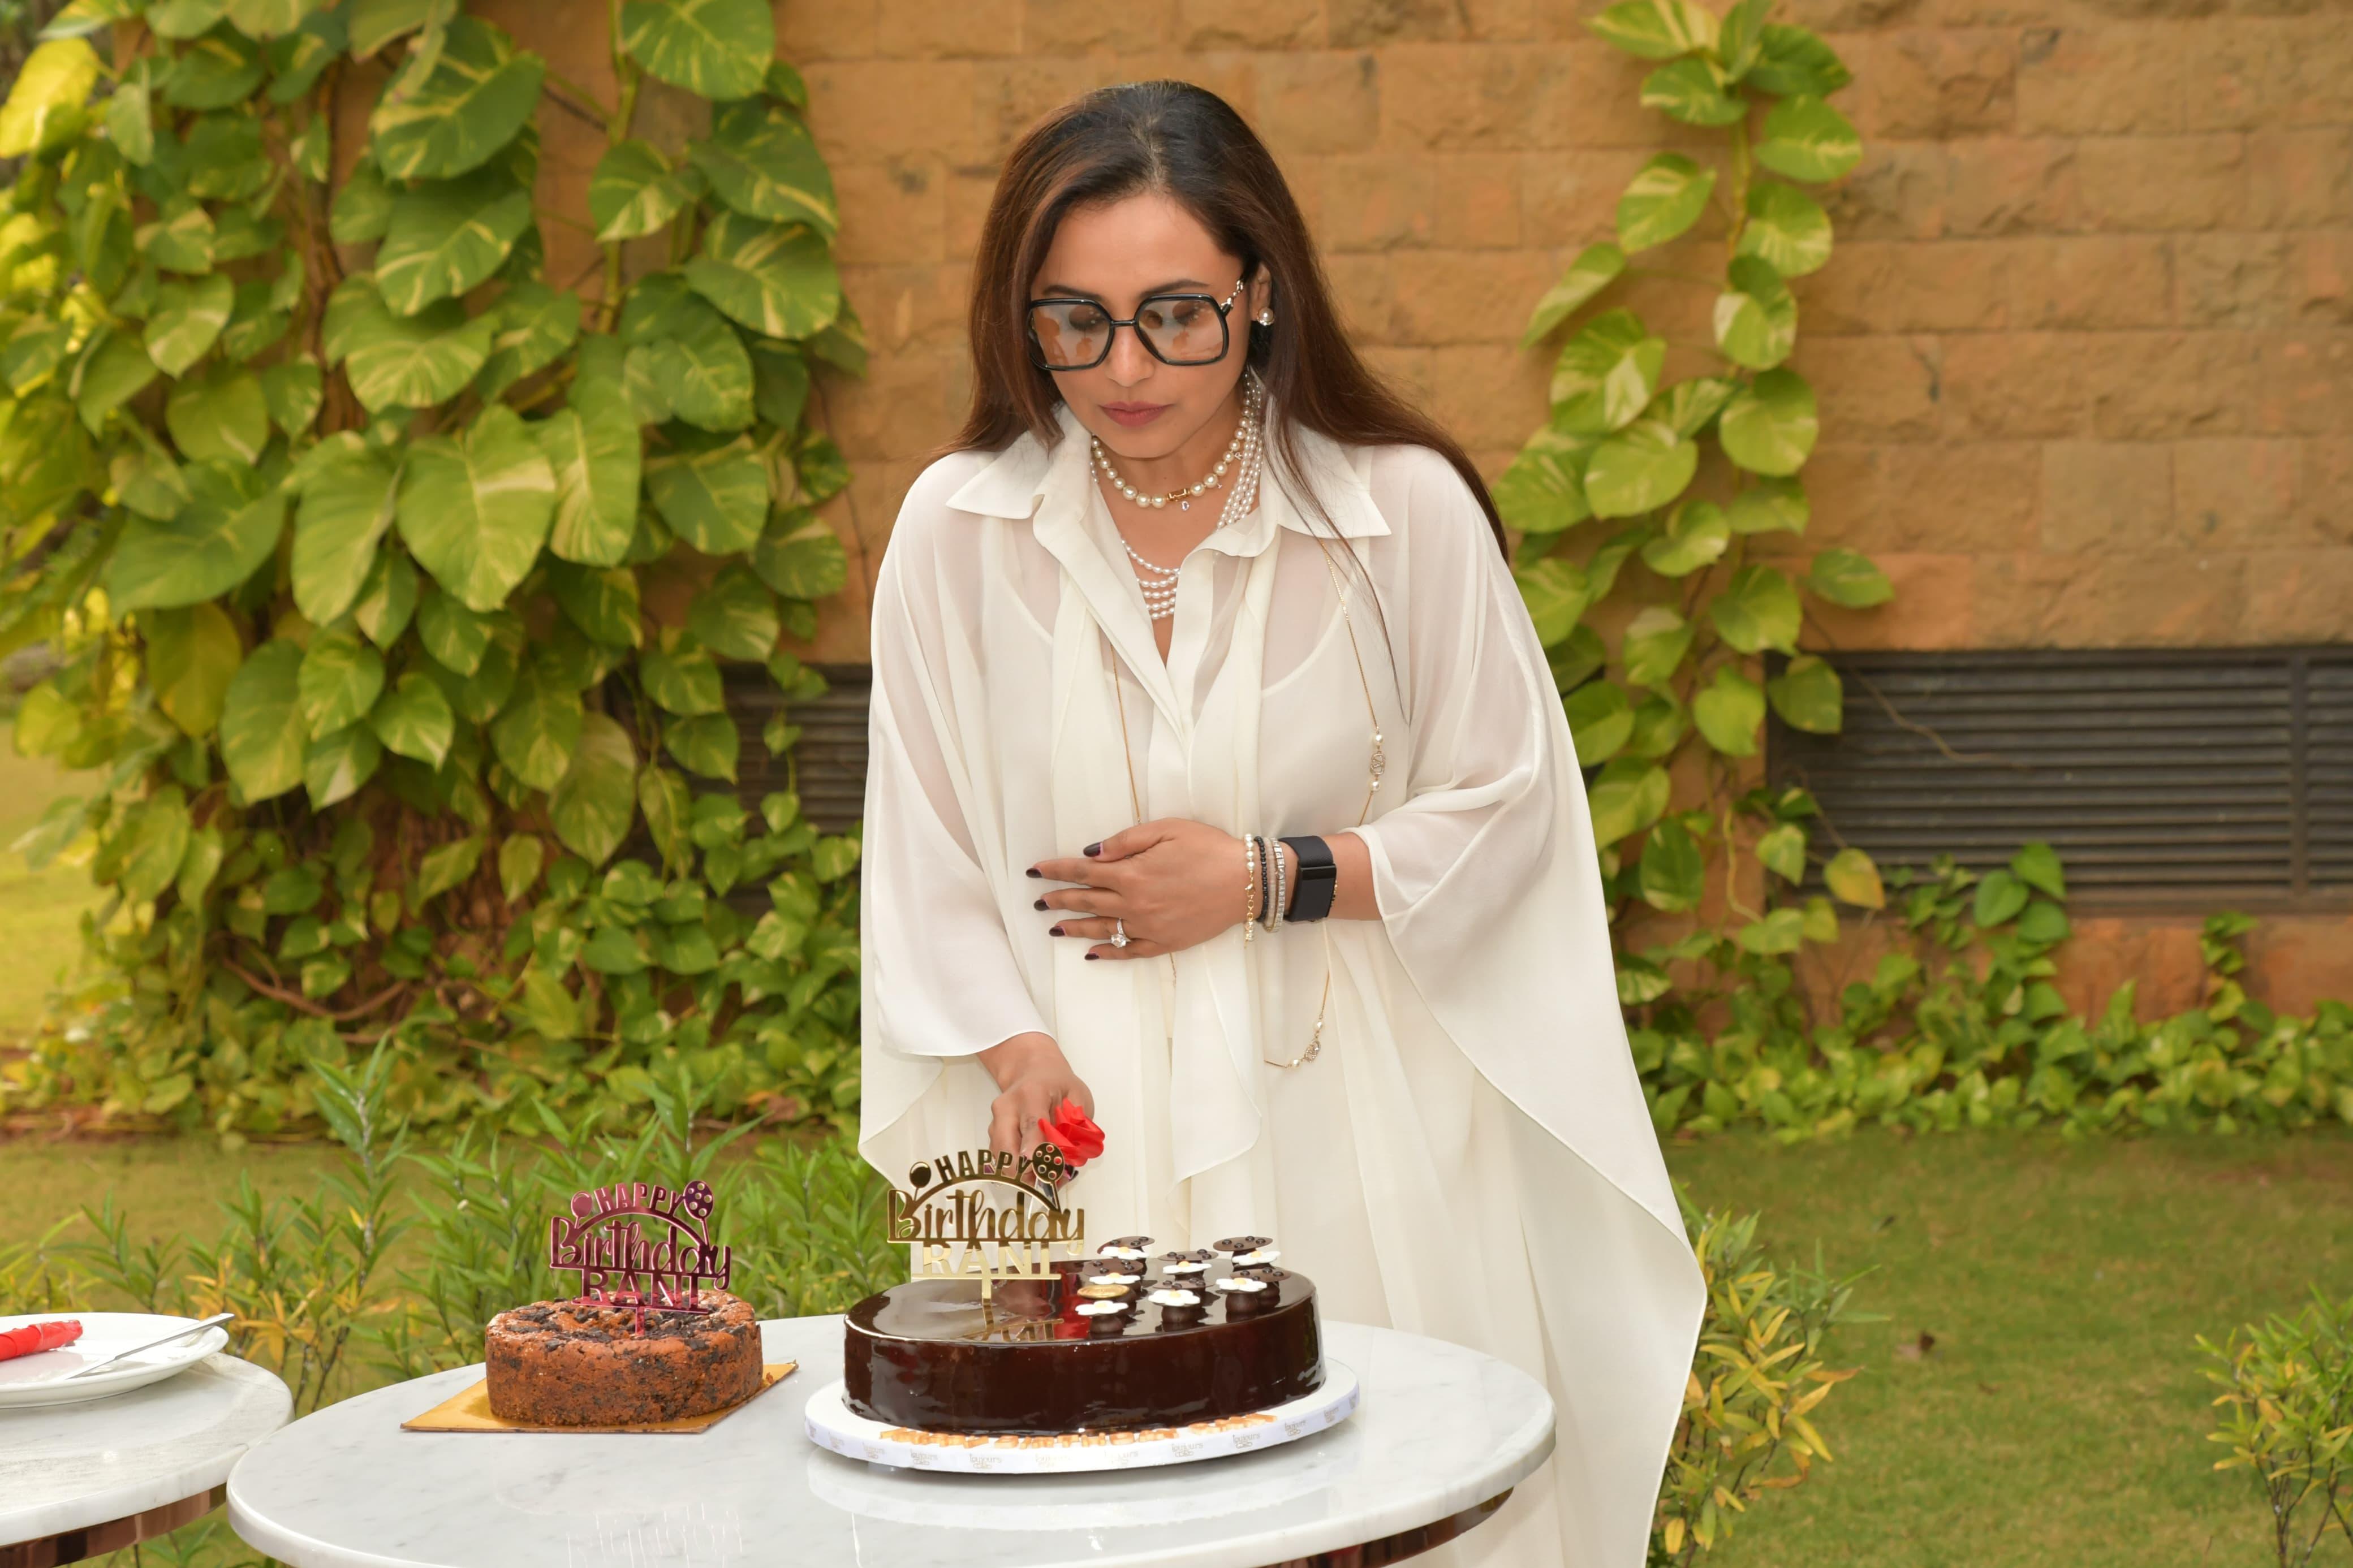 Rani Mukerji looked stunning and elegant in an ivory ensemble paired with a flowing cape as she celebrated her birthday by cutting a cake